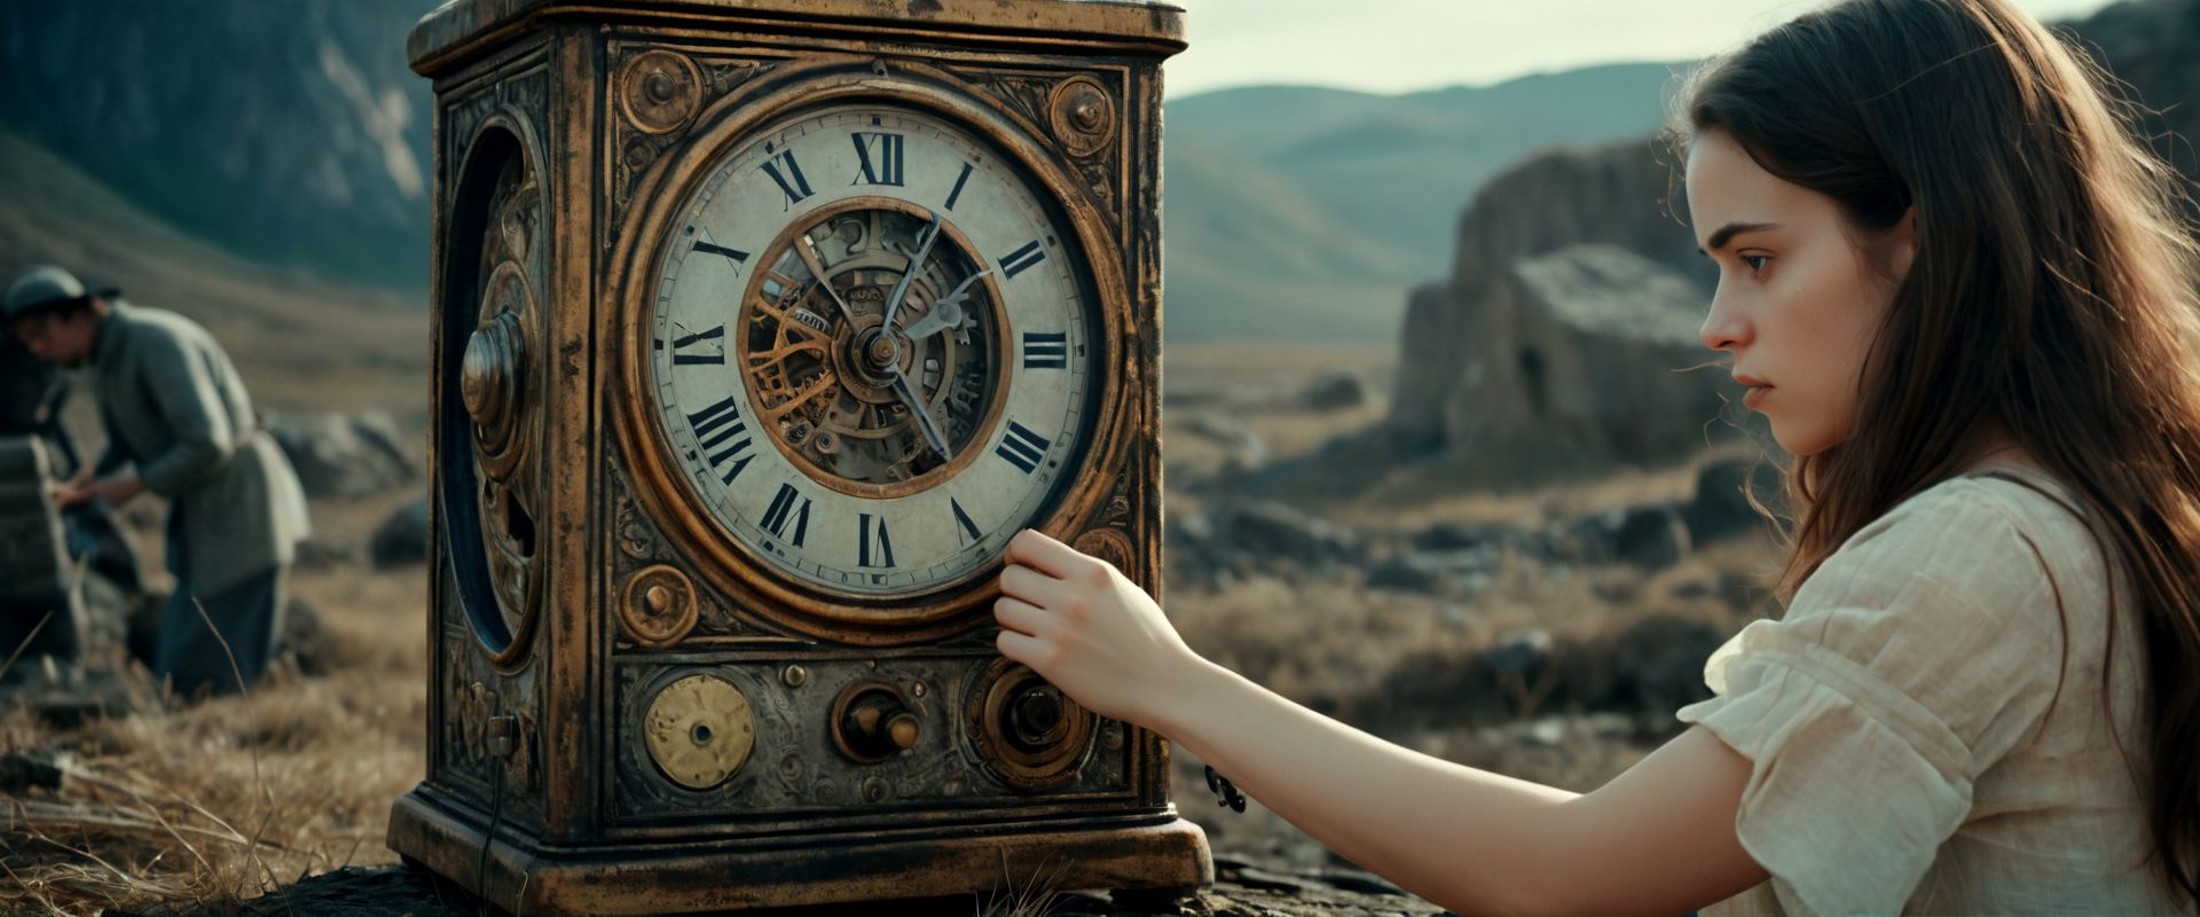 A young woman stumbles upon a mysterious device capable of manipulating time, enabling her to travel across different hist...